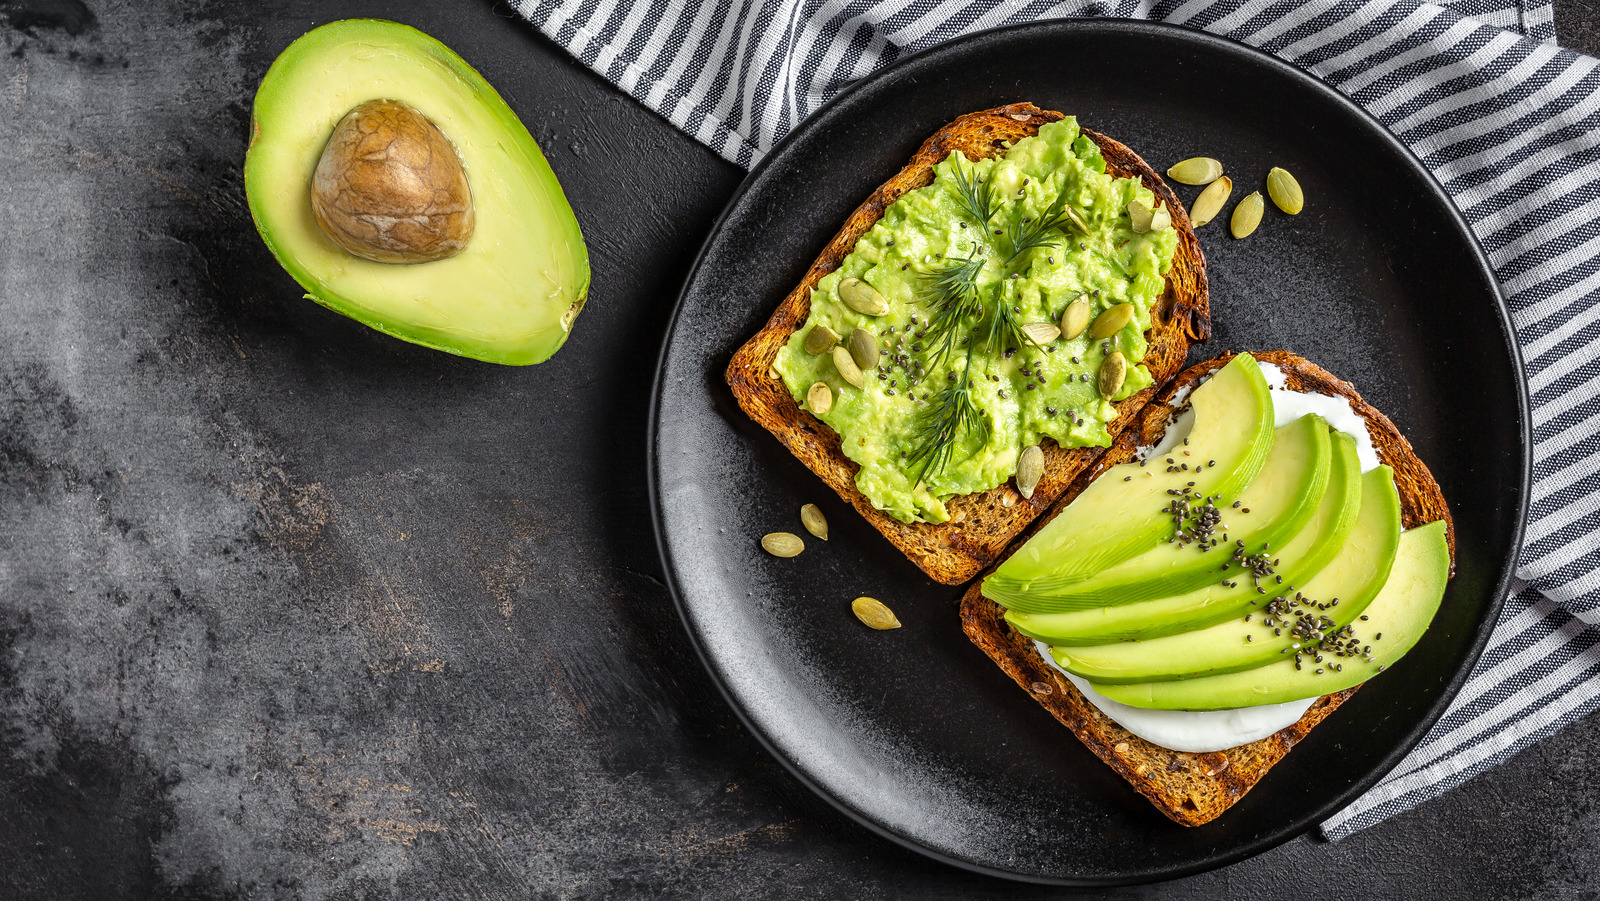 Avocado Toast Topping First-Class Flavor with A Crunch Effect, 2oz Tin Can - Unique Flavors